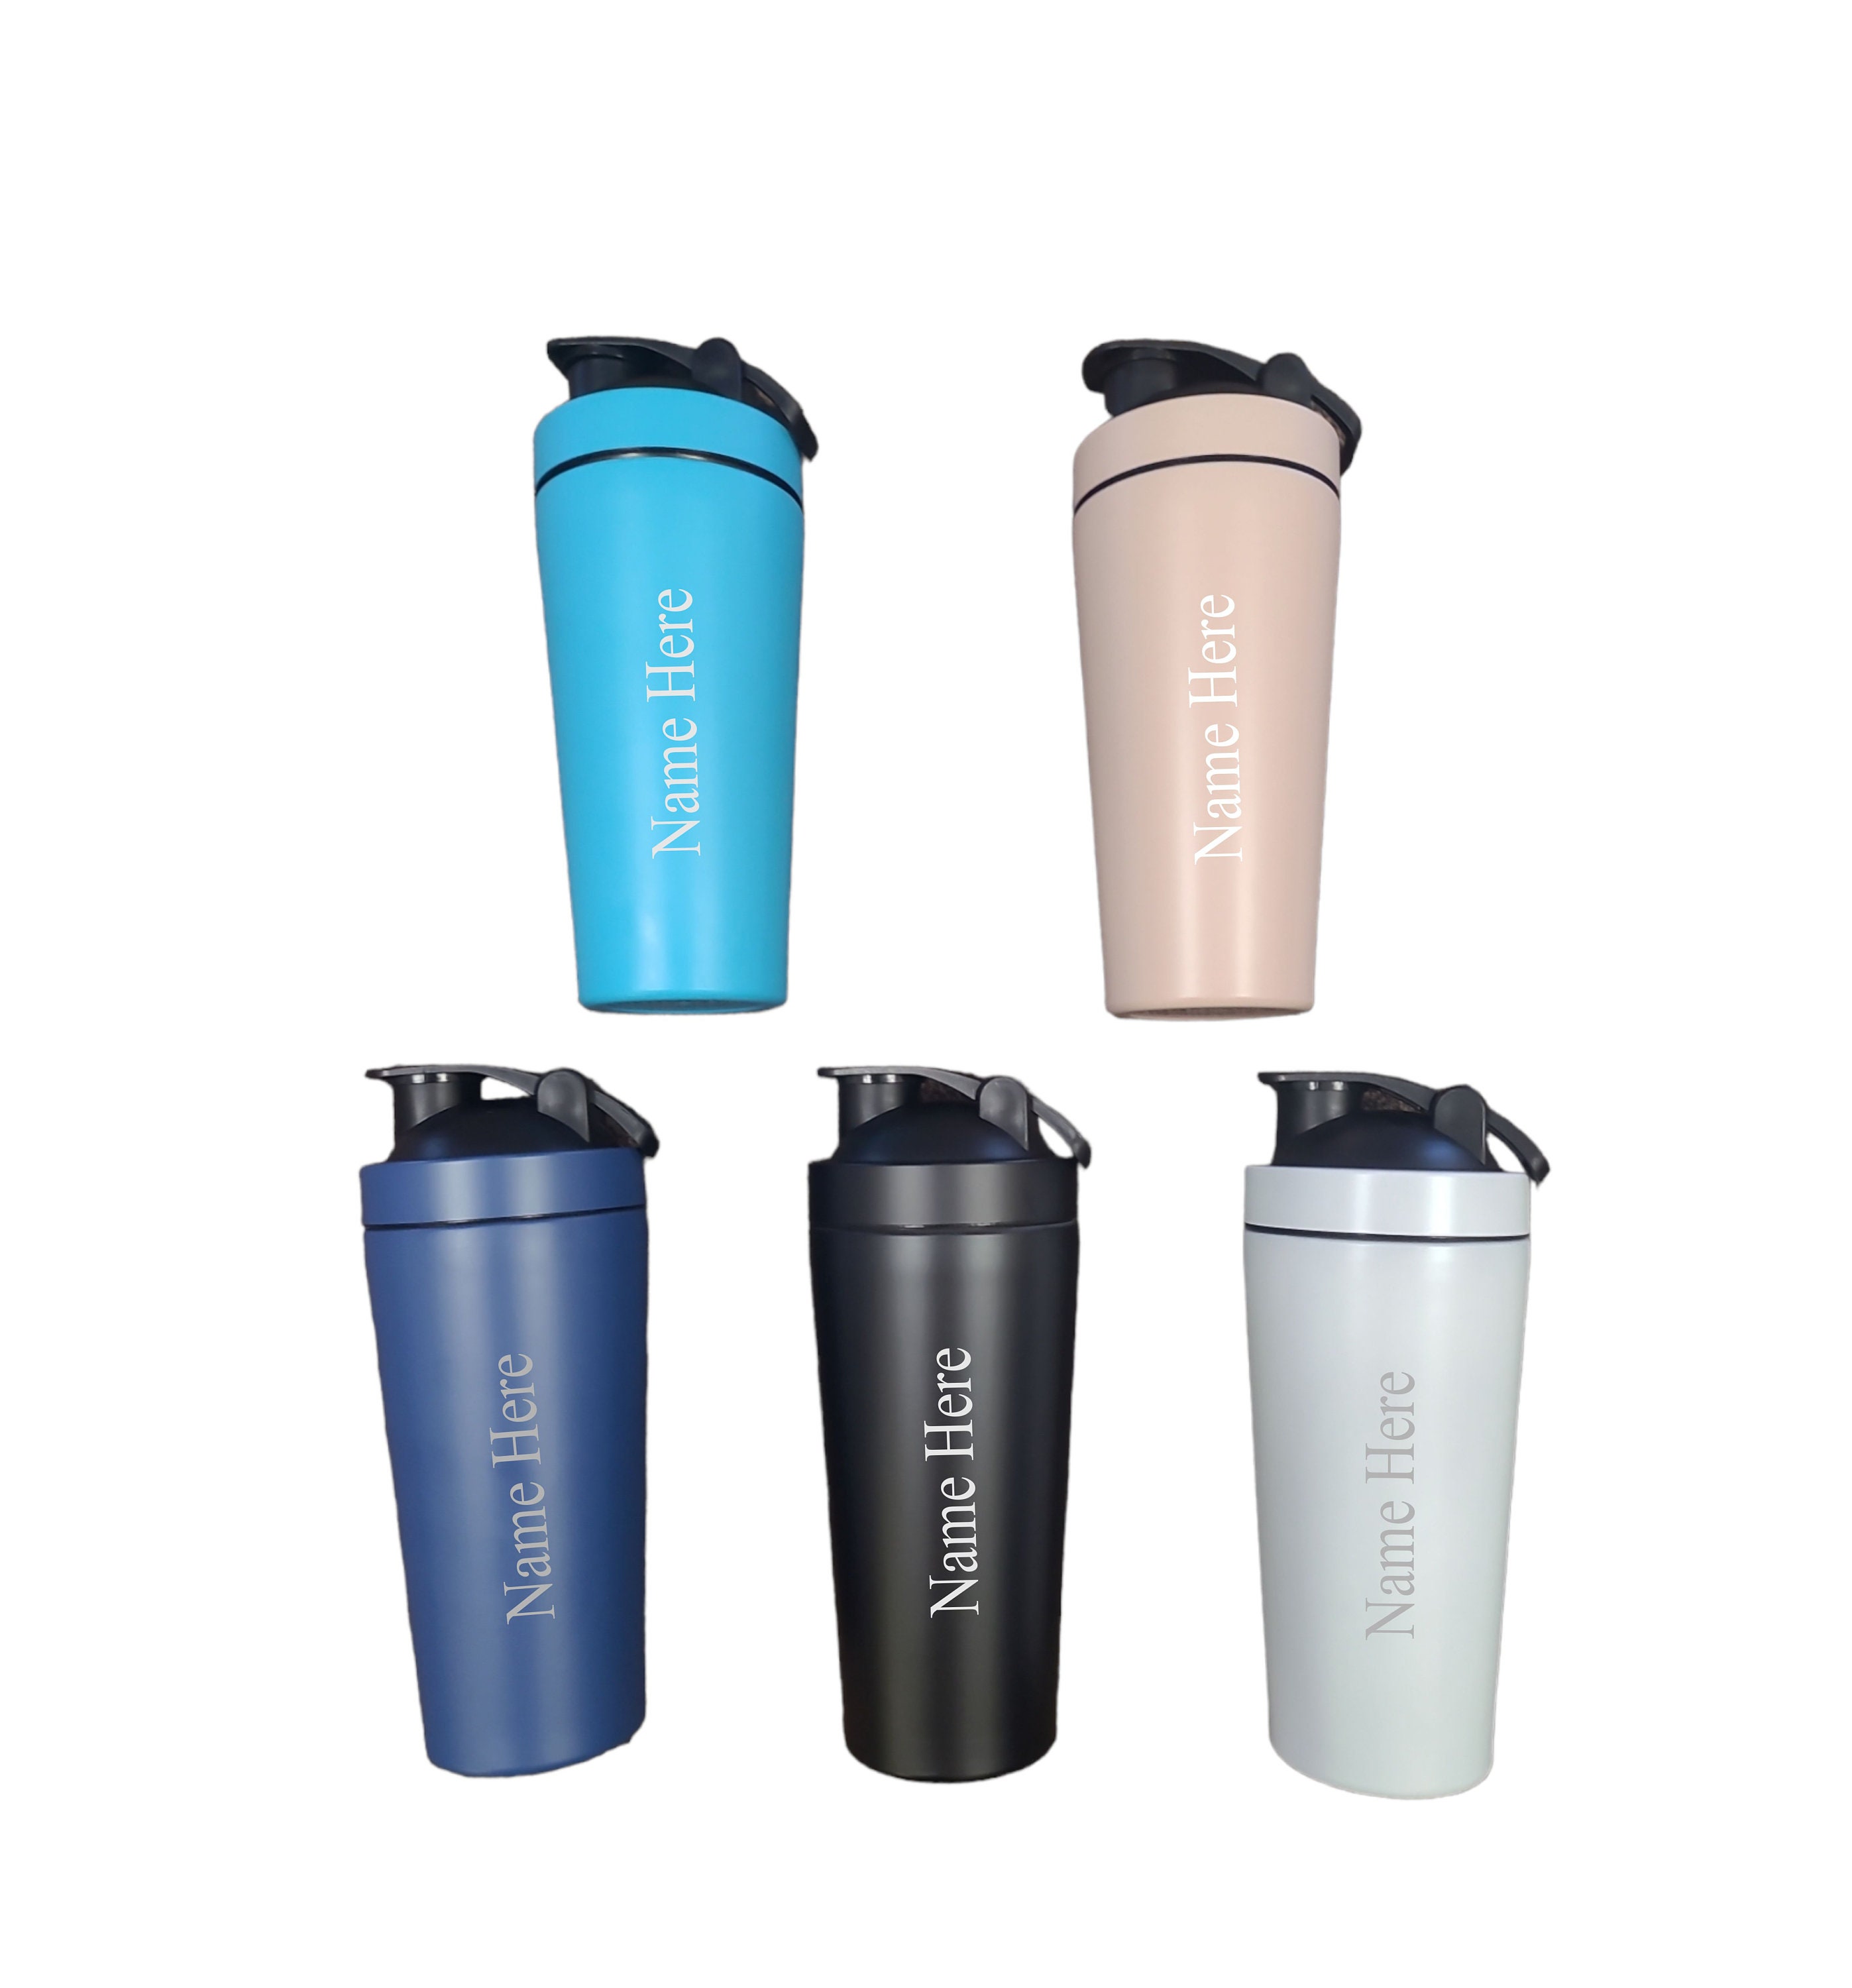 Stainless Steel Visible Window Shaker Bottle BPA Free, Gym for Protein  Shaker